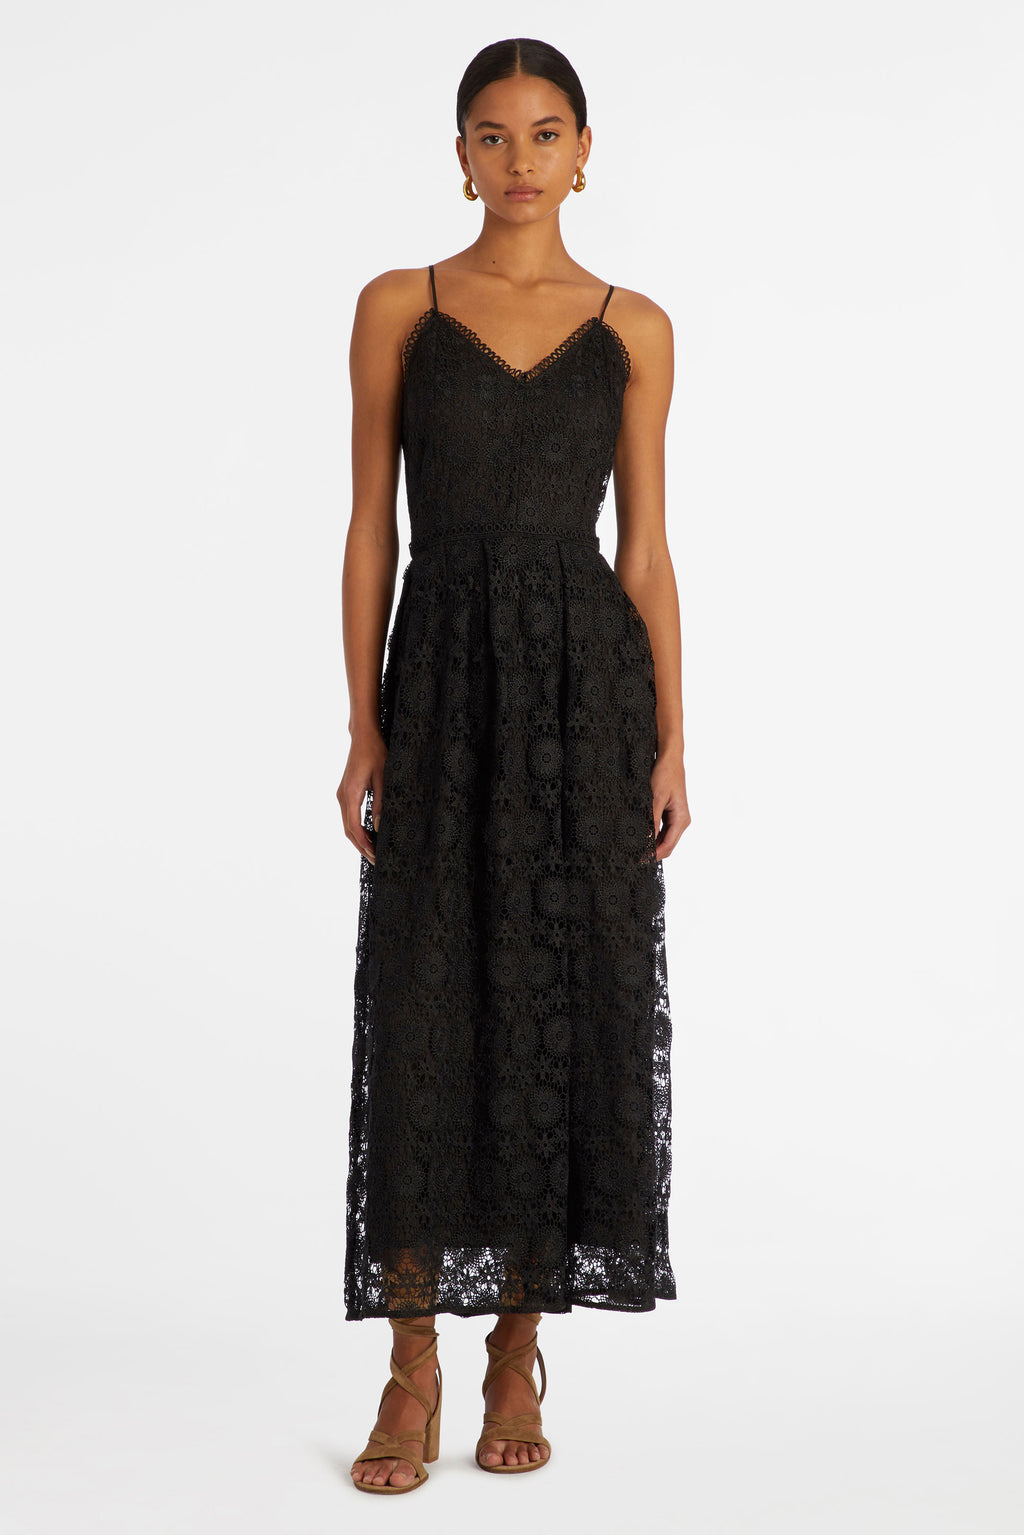 Black lace long dress with spaghetti straps and v-neckline